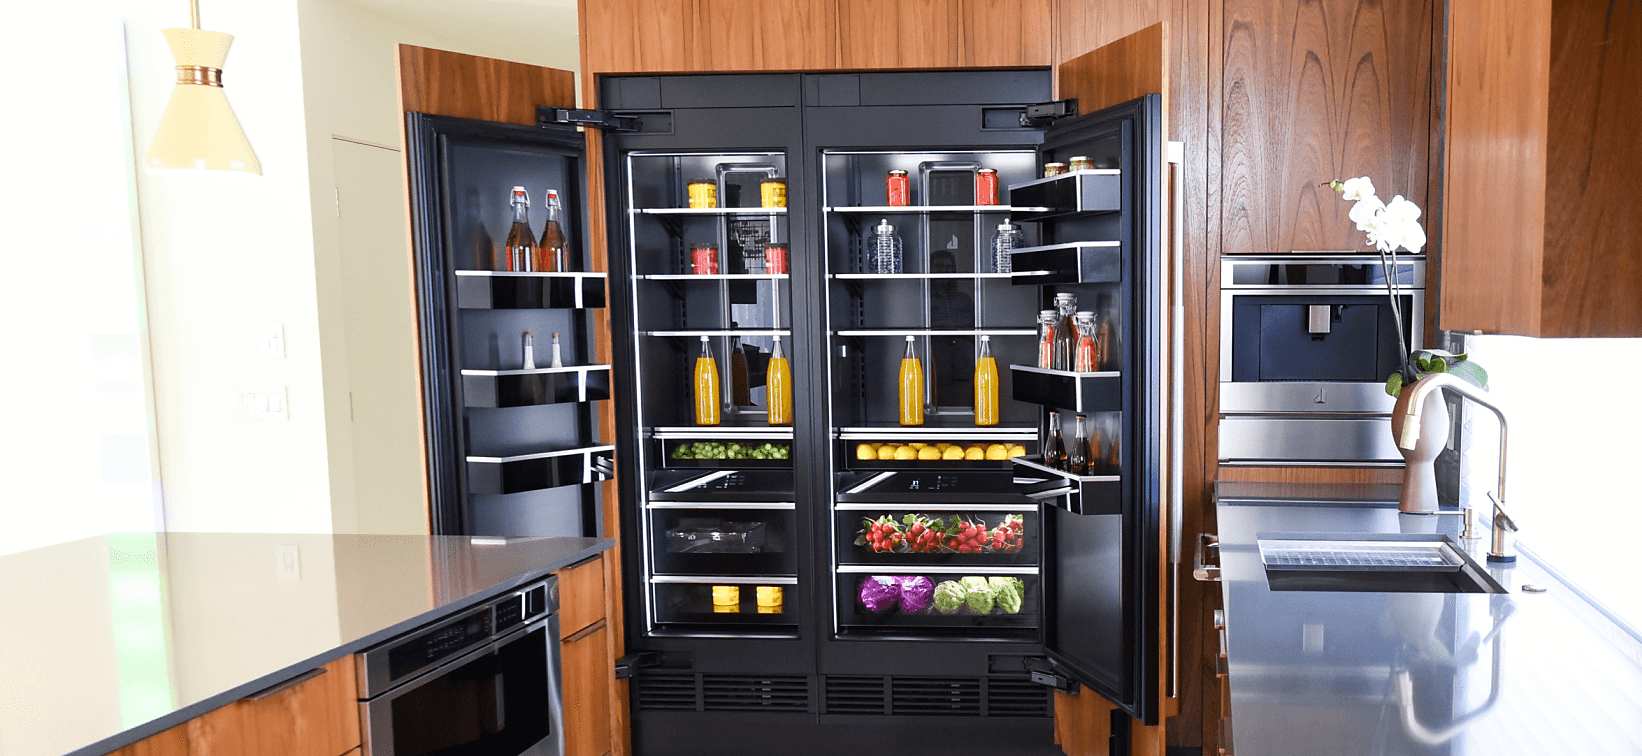 An open JennAir Column Refrigerator filled with fine foods and ingredients in a kitchen with wooden cabinetry. 